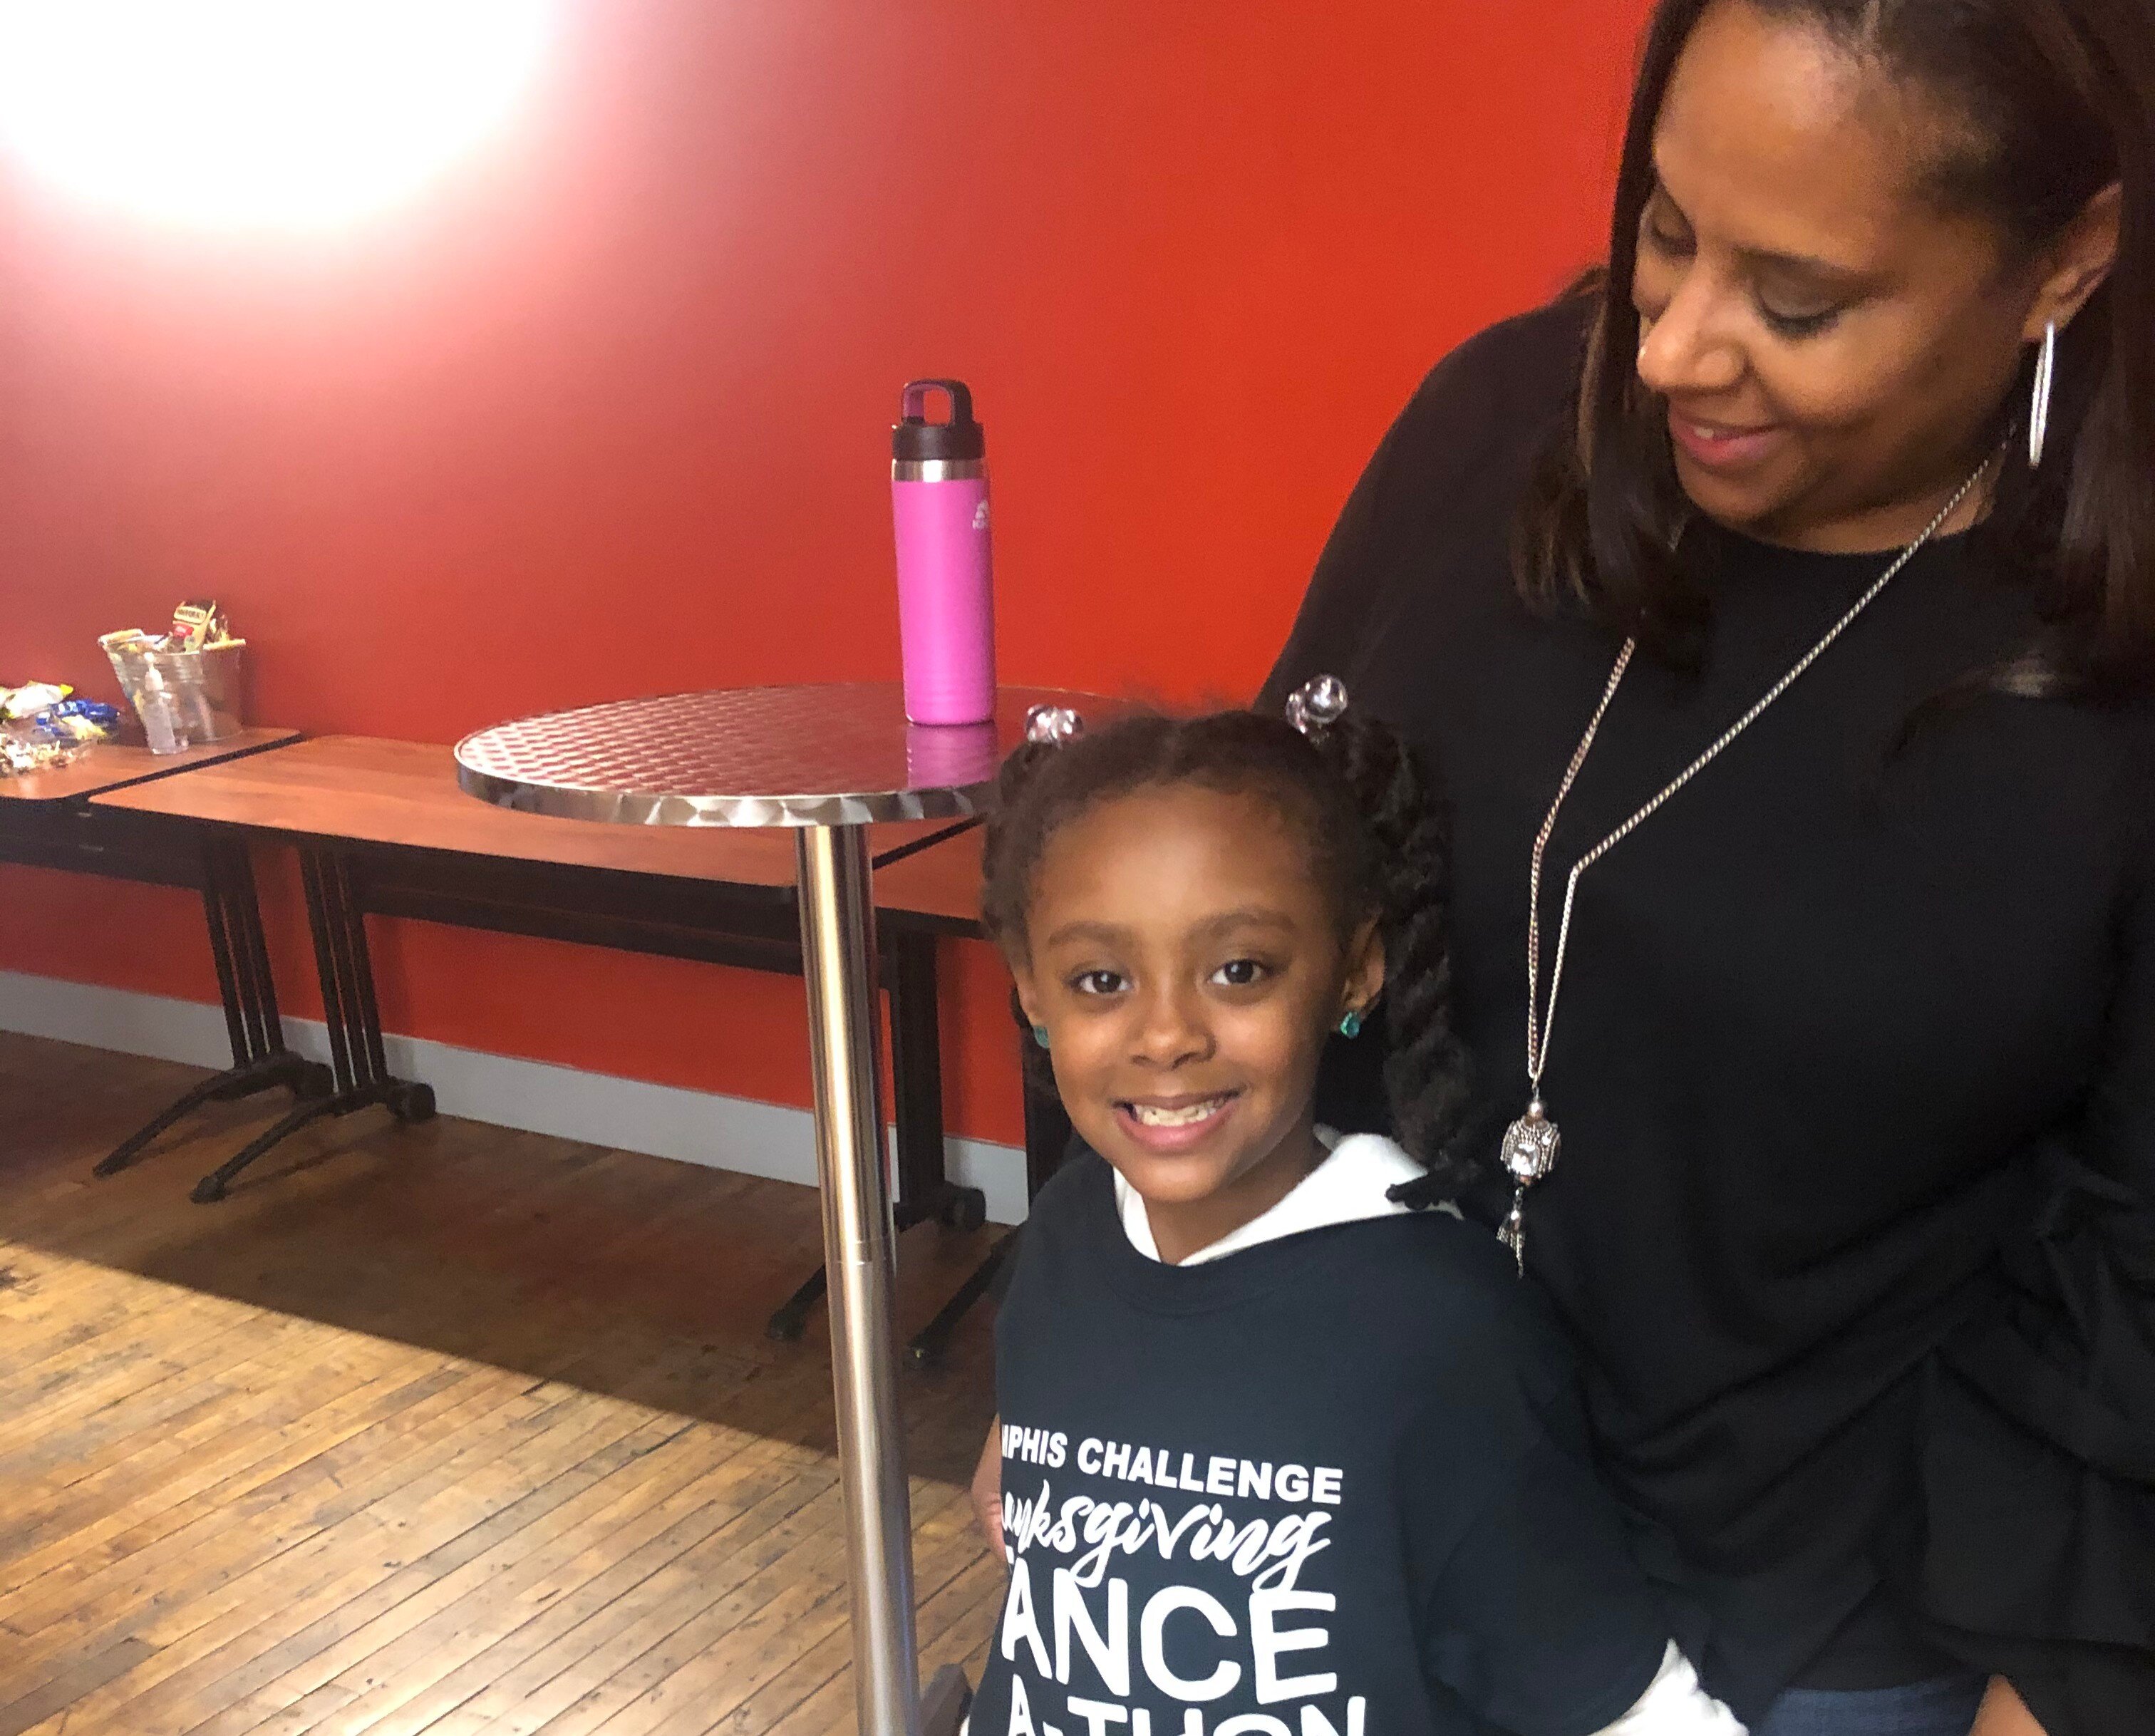 Dr. Angela Anderson,  Memphis Challenge facilitator, with her daughter, Alex Anderson. Alex is a Schilling Farms Elementary student and future Memphis Challenger. She danced alongside the older kid at the Dance-A-Thon. (Memphis Challenge)